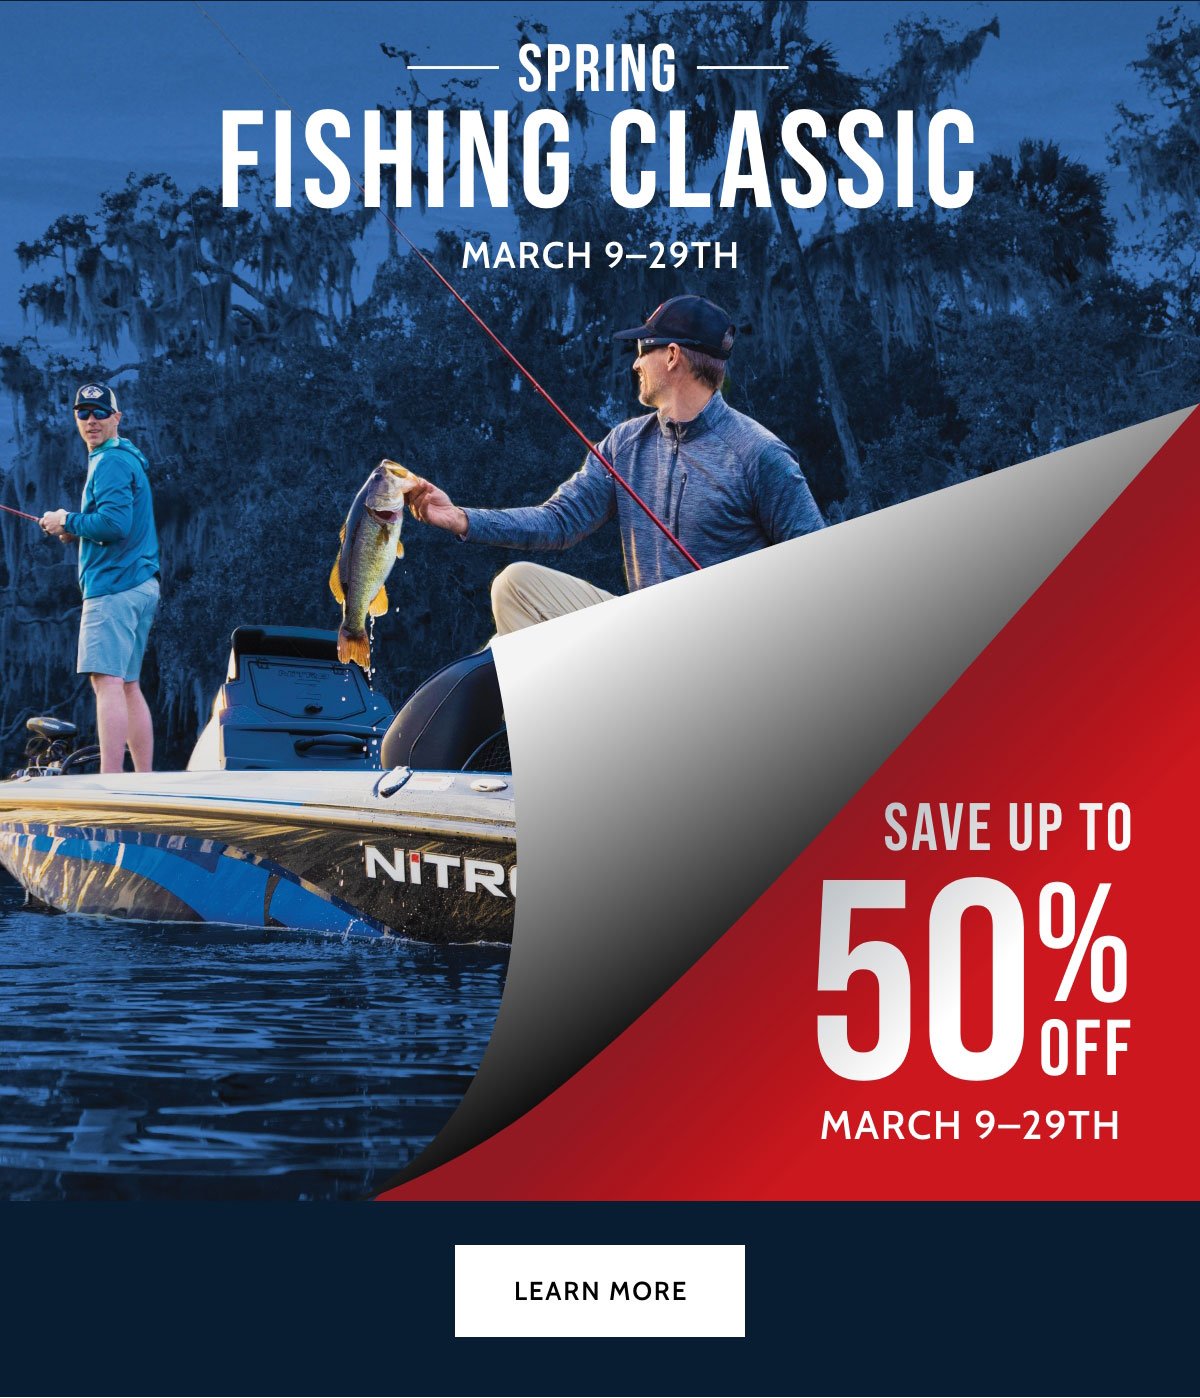 Bass Pro Shops: The Countdown To The Spring Fishing Classic Is On!